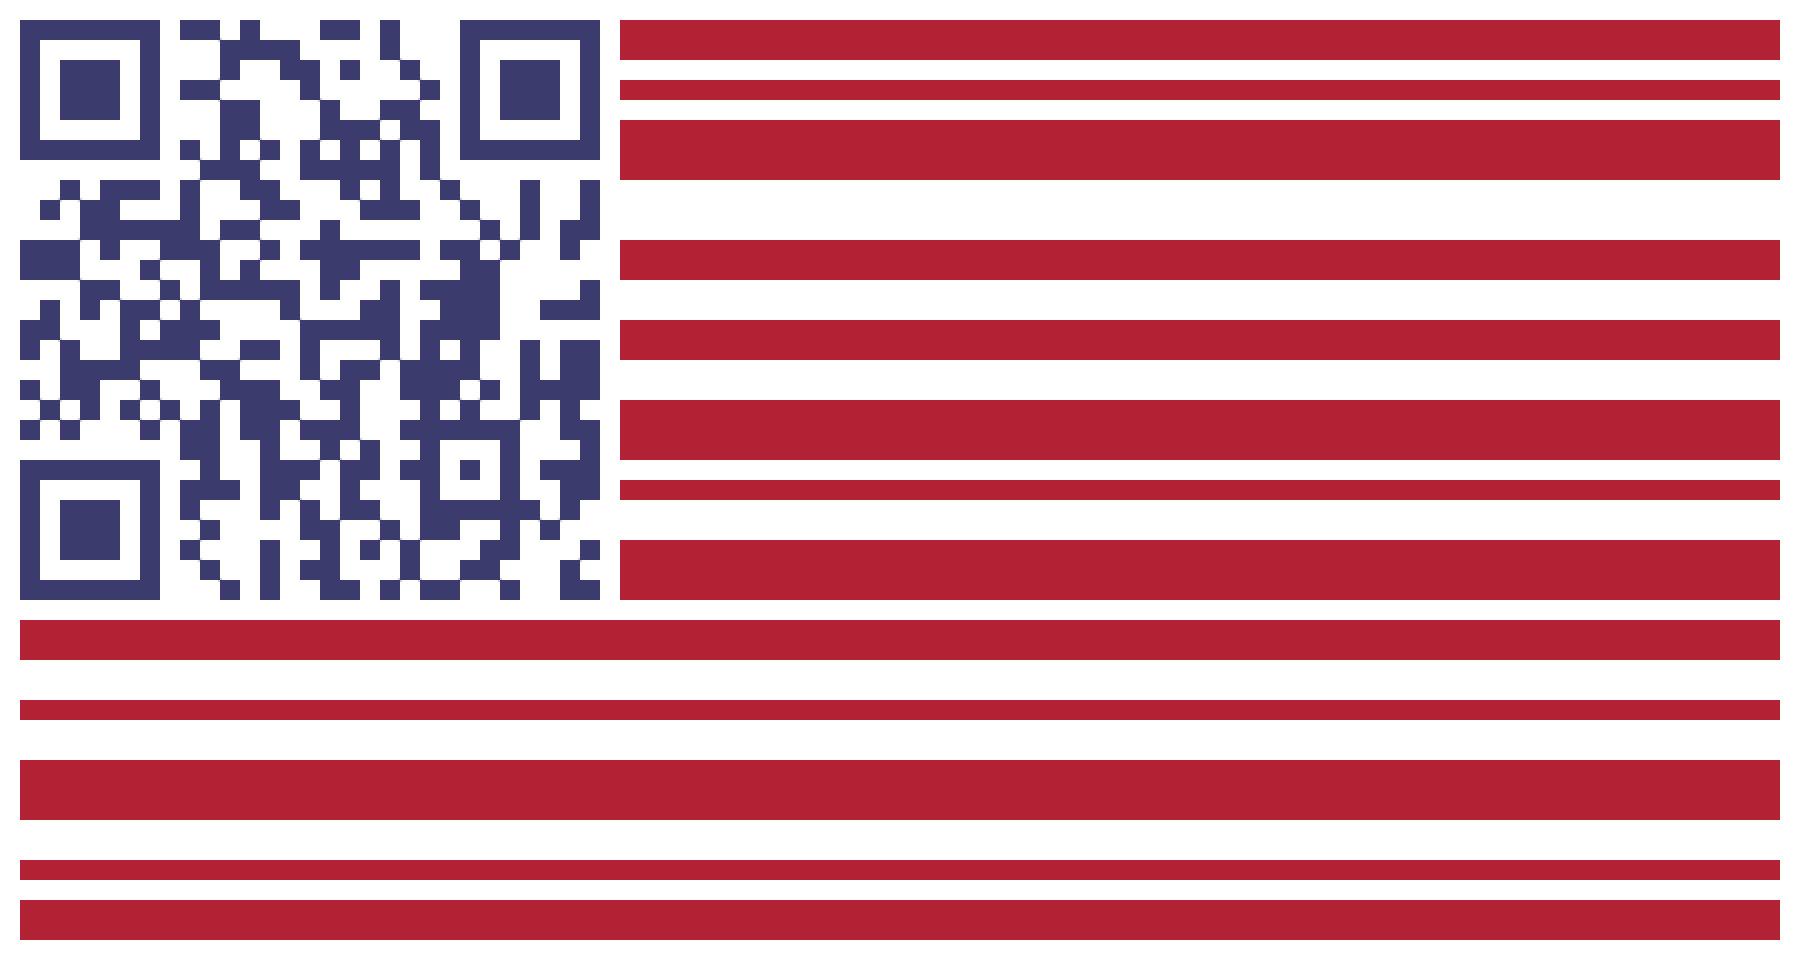 File:Barcode American Flag.png.